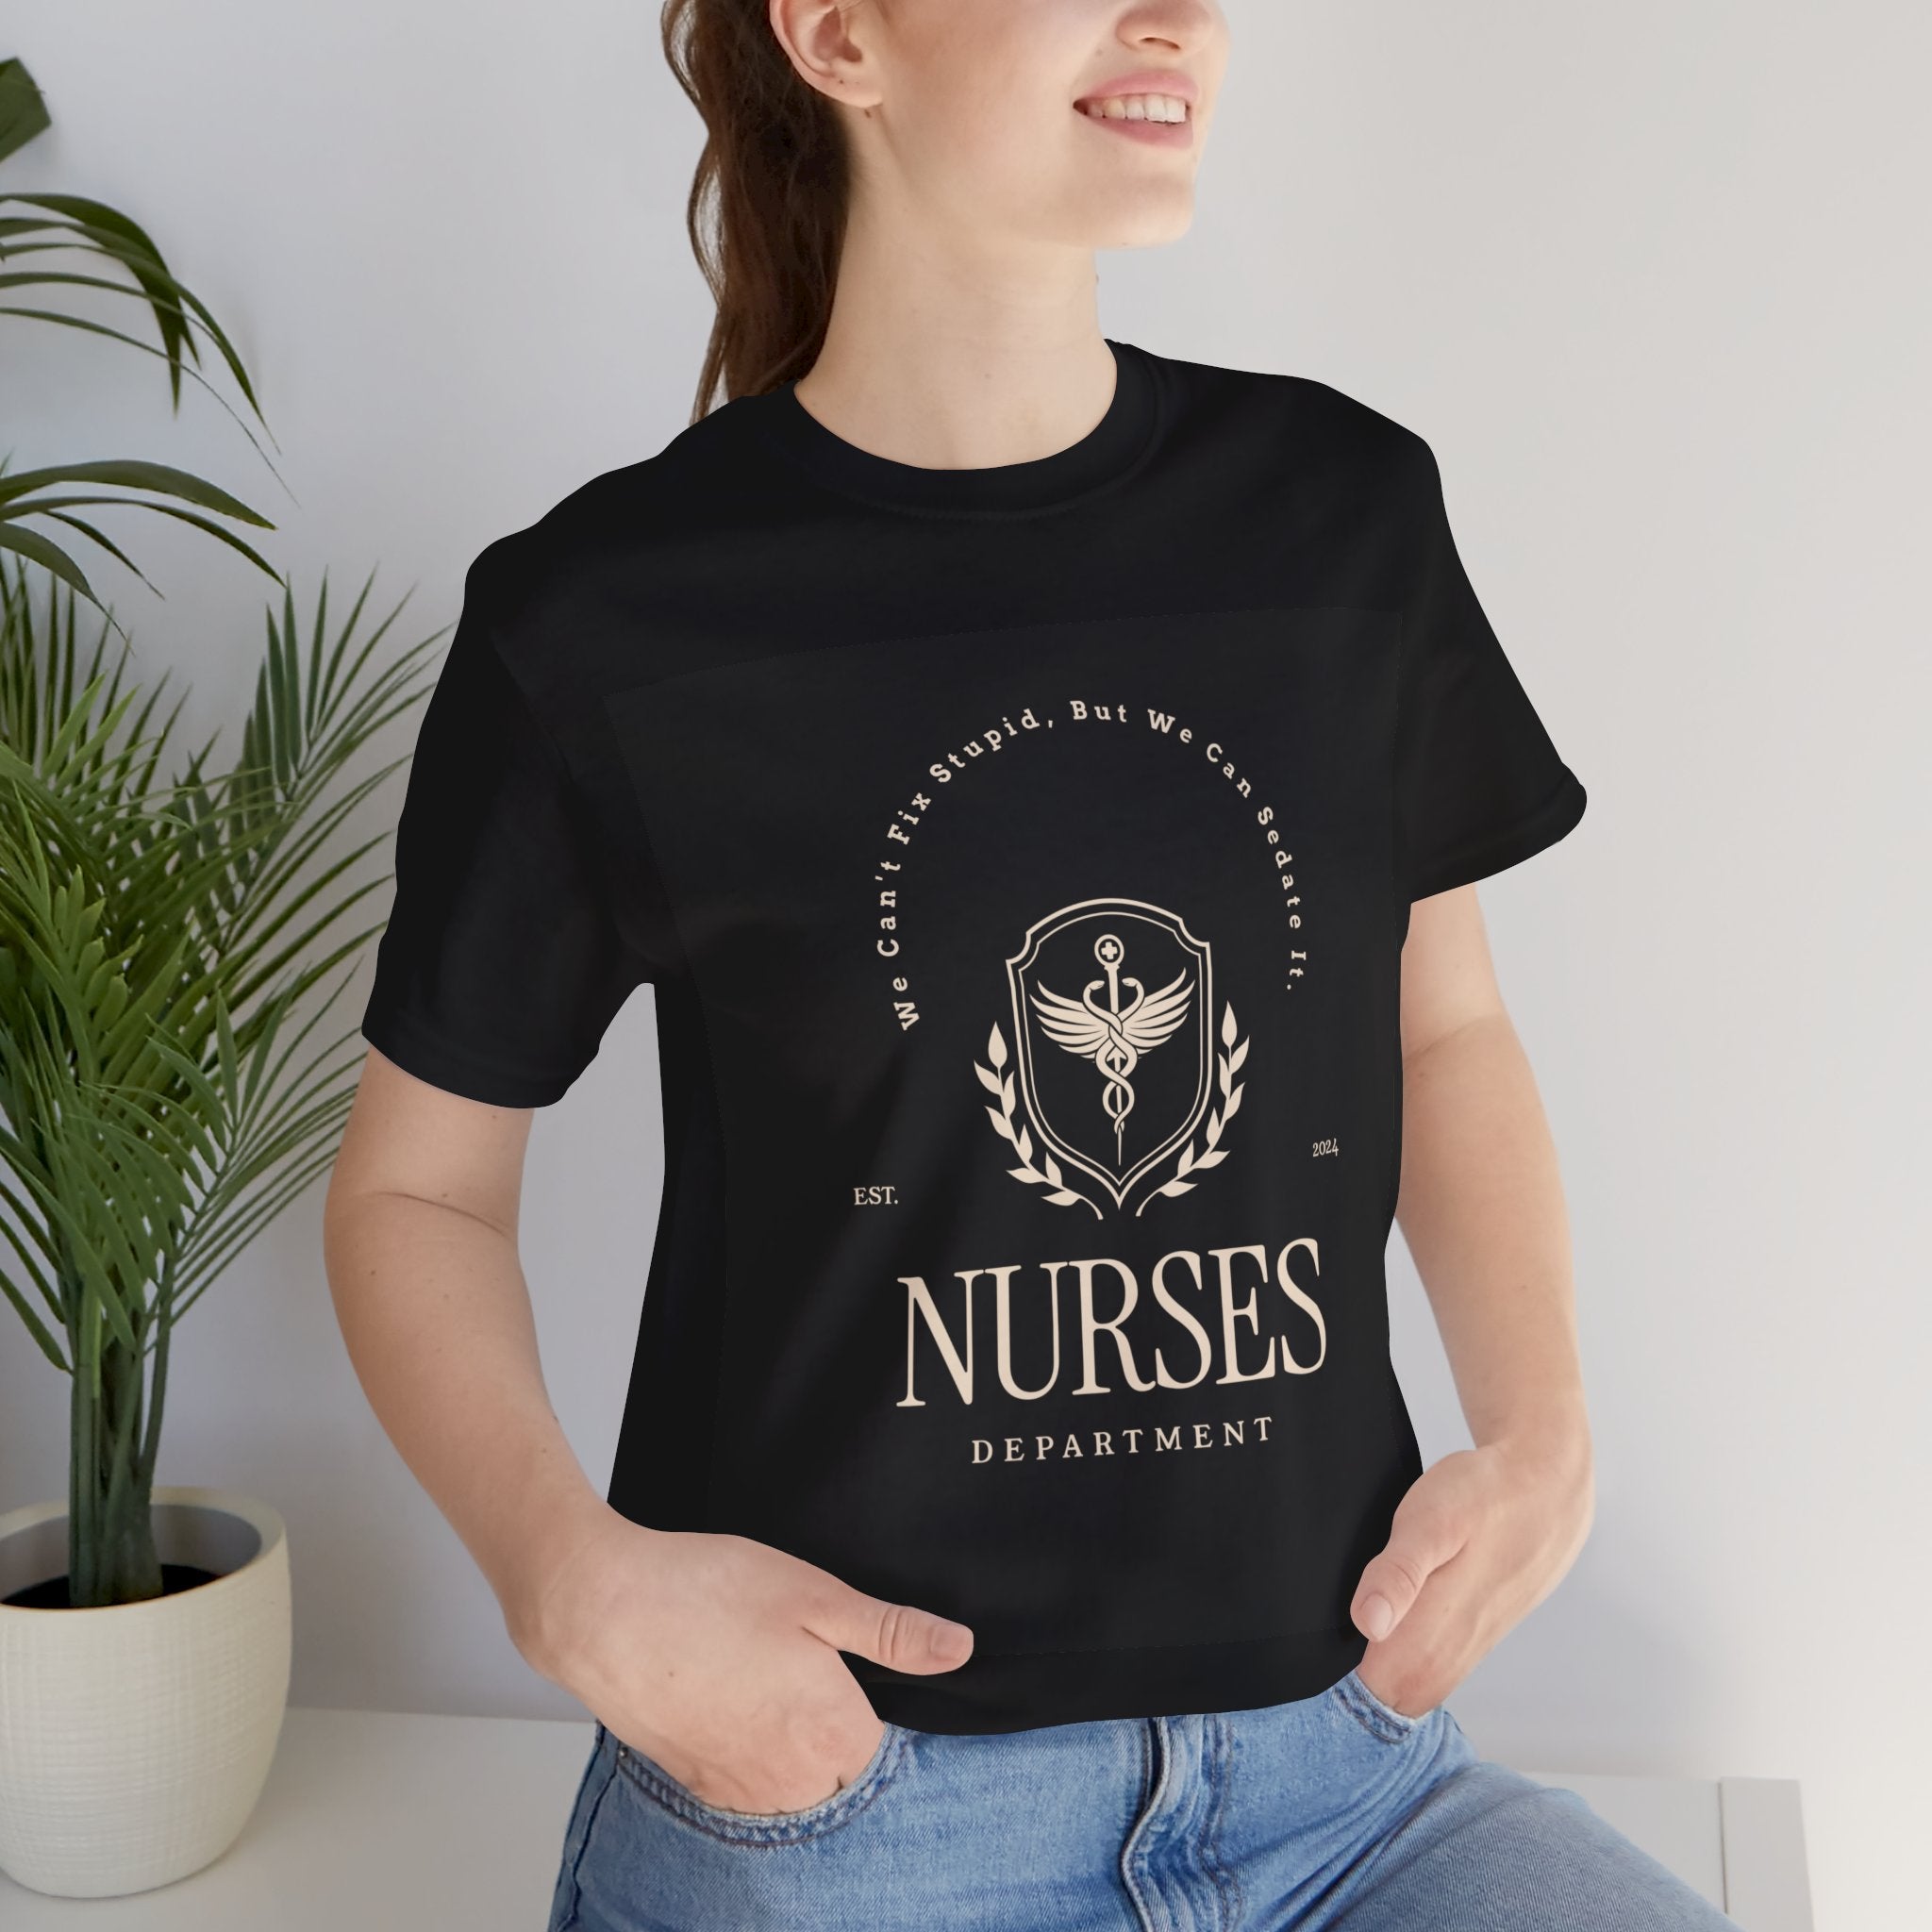 The image features a high-quality, soft, unisex jersey tee in a classic cut. The front proudly displays the humorous "We Can't Fix Stupid, But We Can Sedate It" slogan, with a customizable "Est. Date" below that adds a personal touch to the shirt. It's the perfect combination of comfort and sass that any nurse would be proud to wear on their day off or under their scrubs.